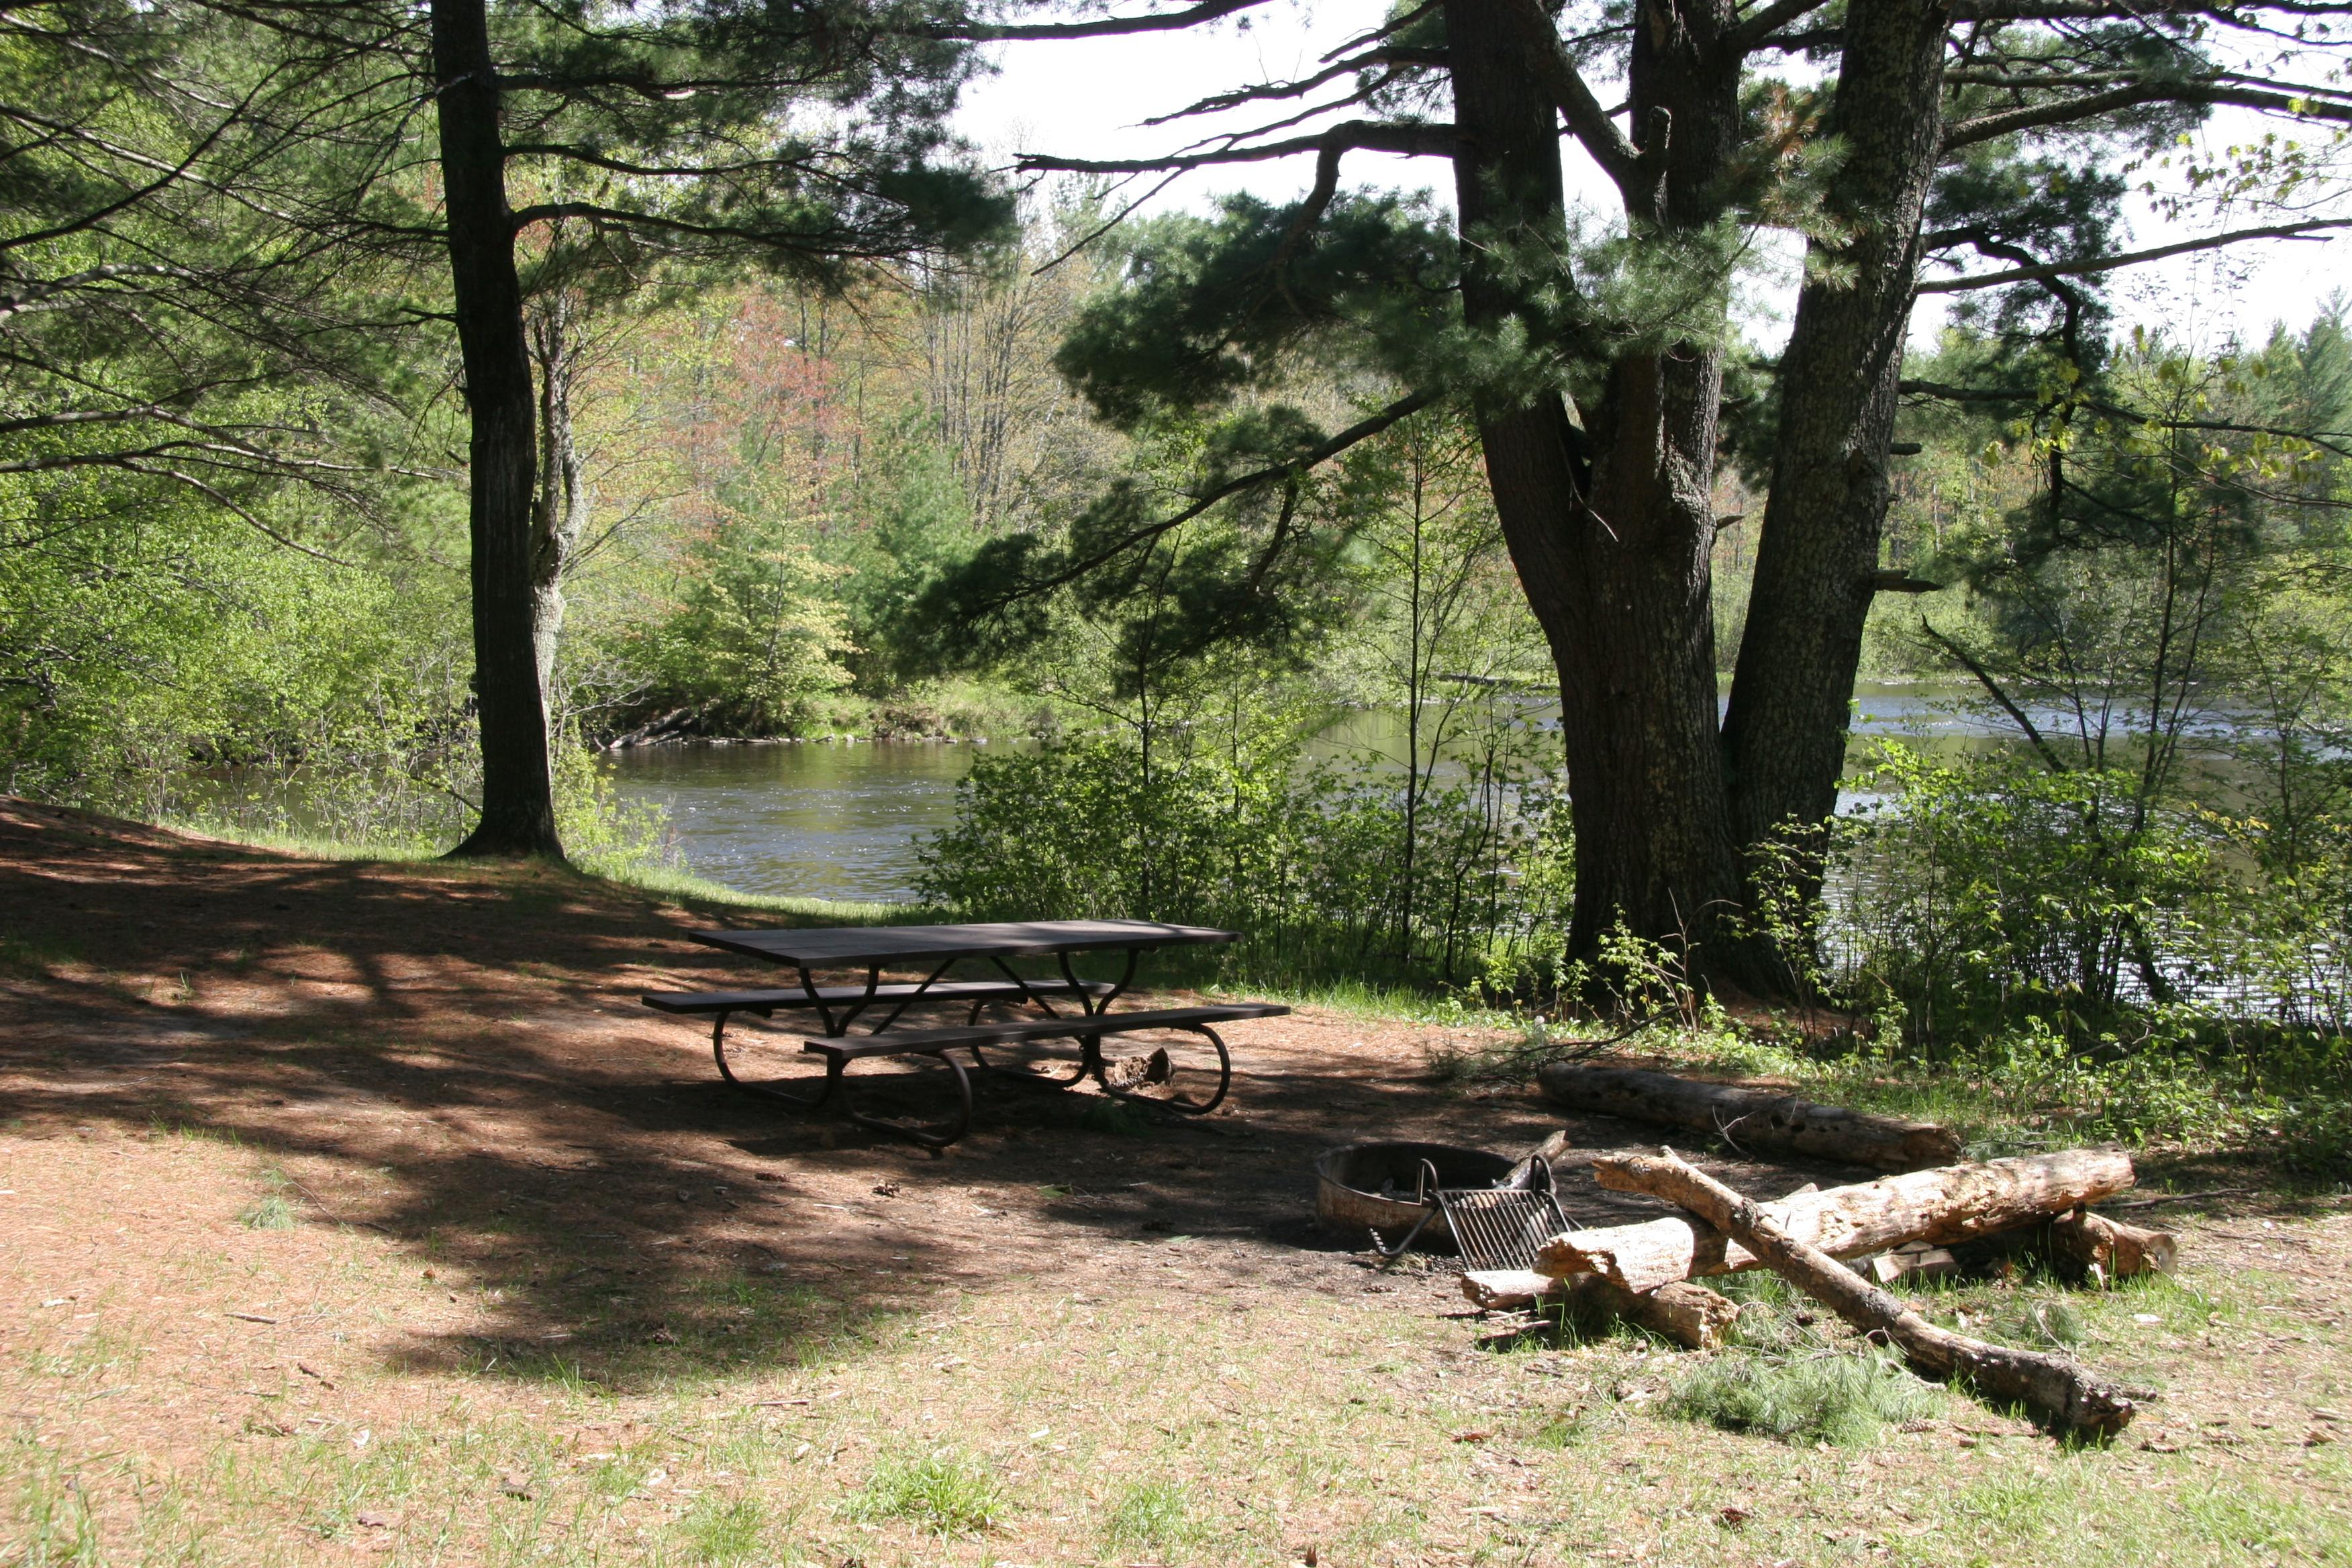 A picnic table and fire ring sit under the shade of pine trees next to a river.